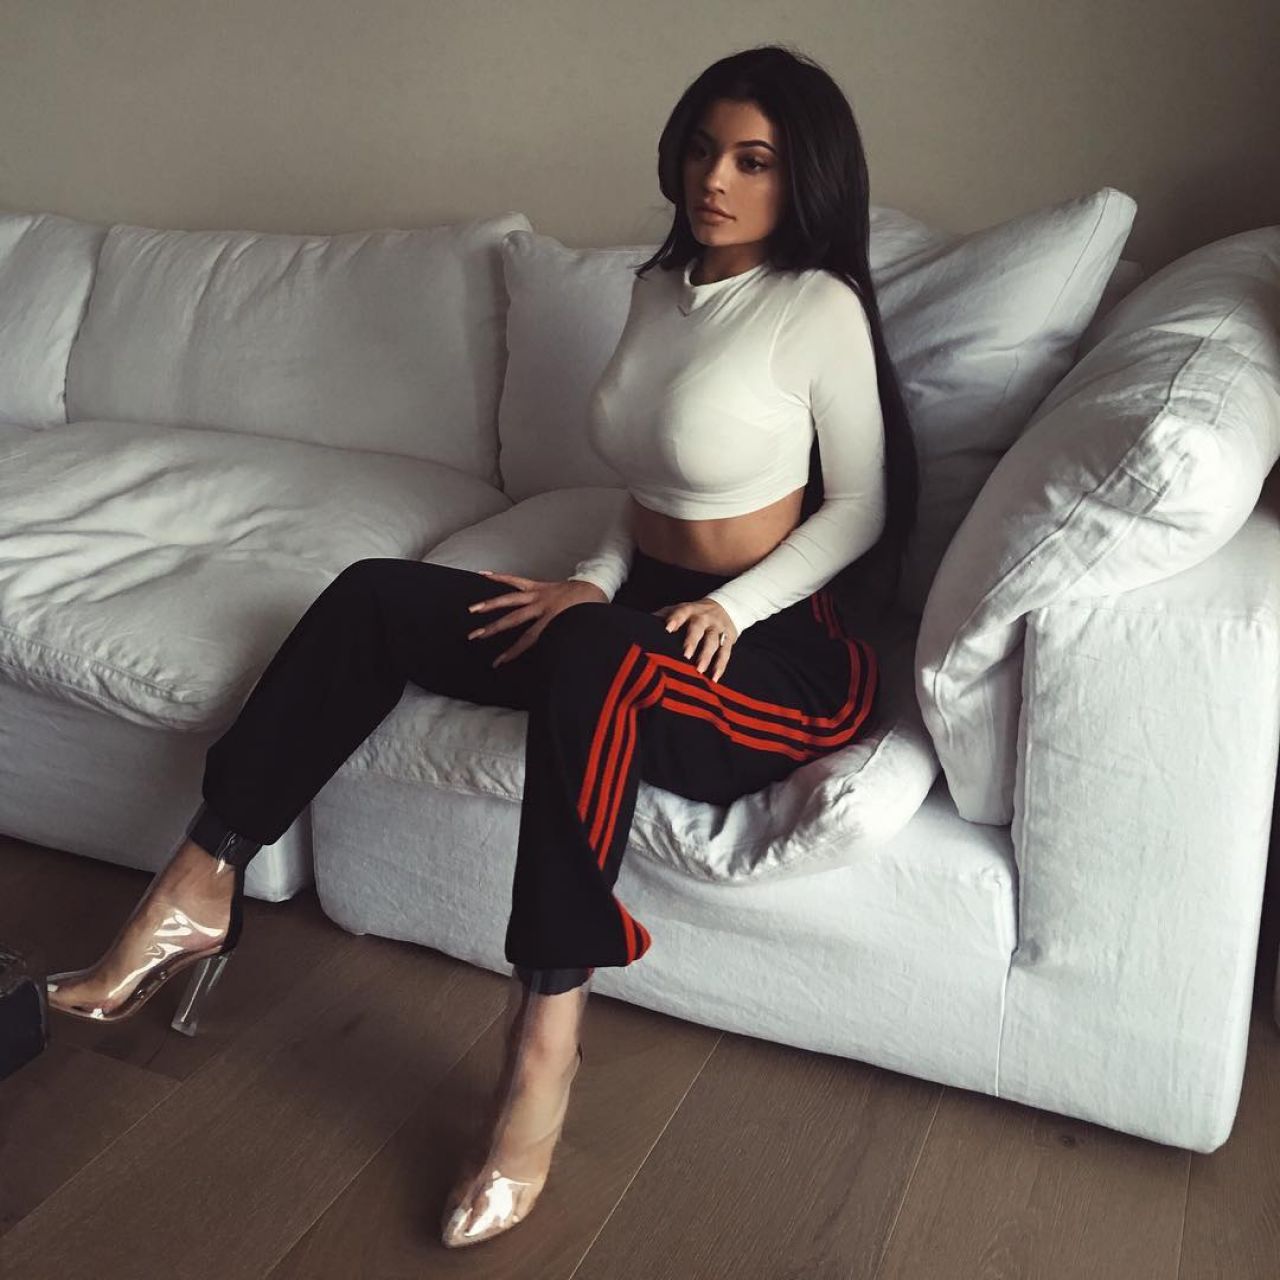 Best Kylie Images On Pinterest Kylie Jenner Jenners 2